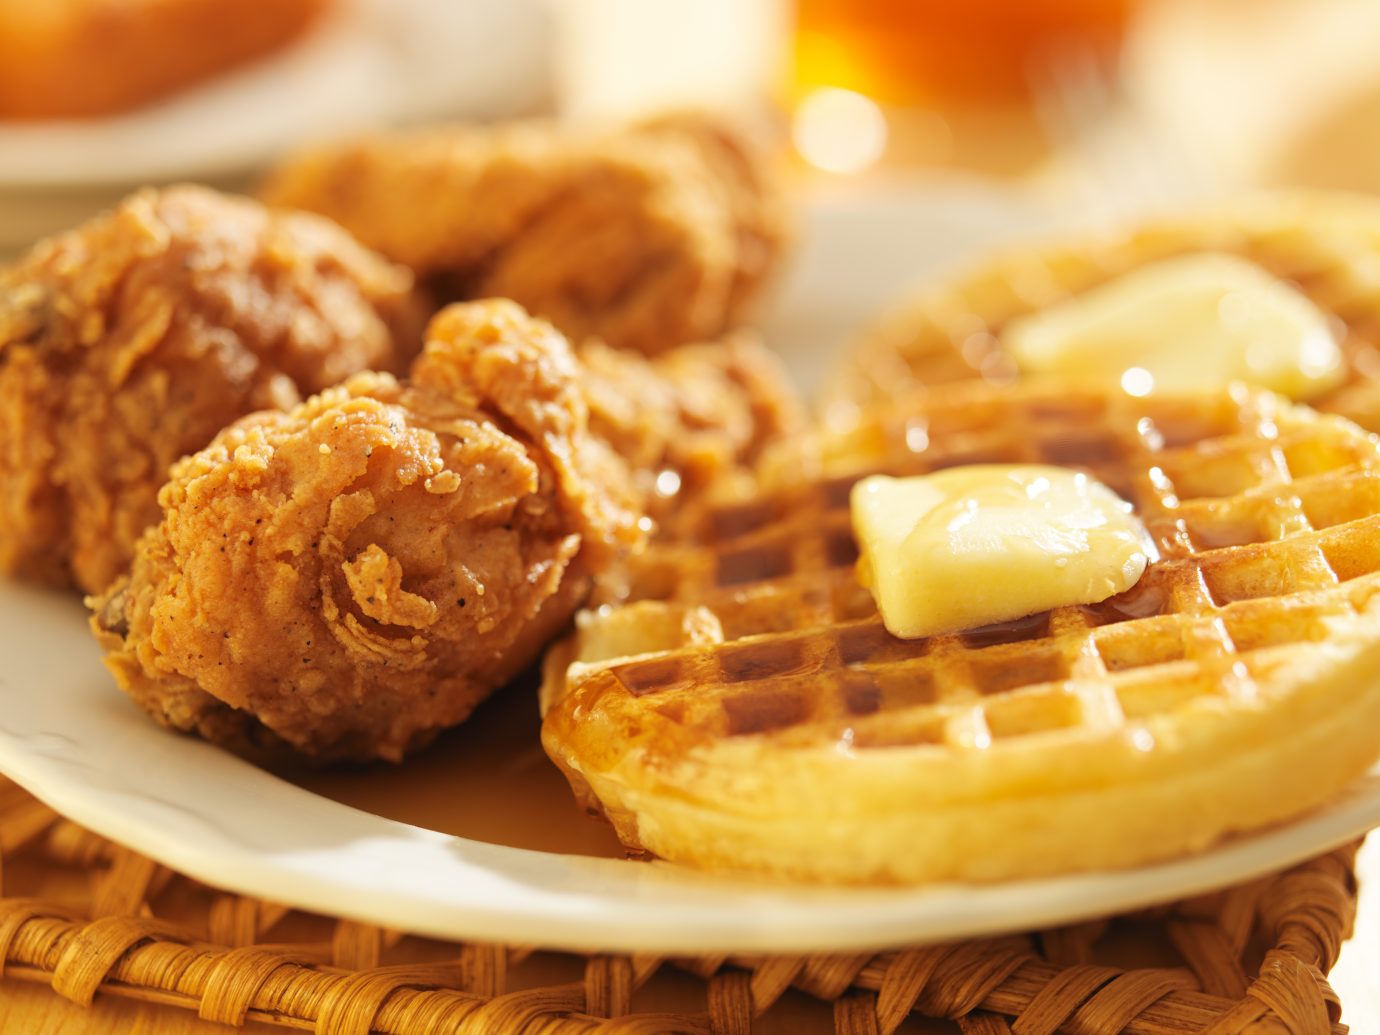 What Human Emotion Am I? Chicken and waffles comfort food